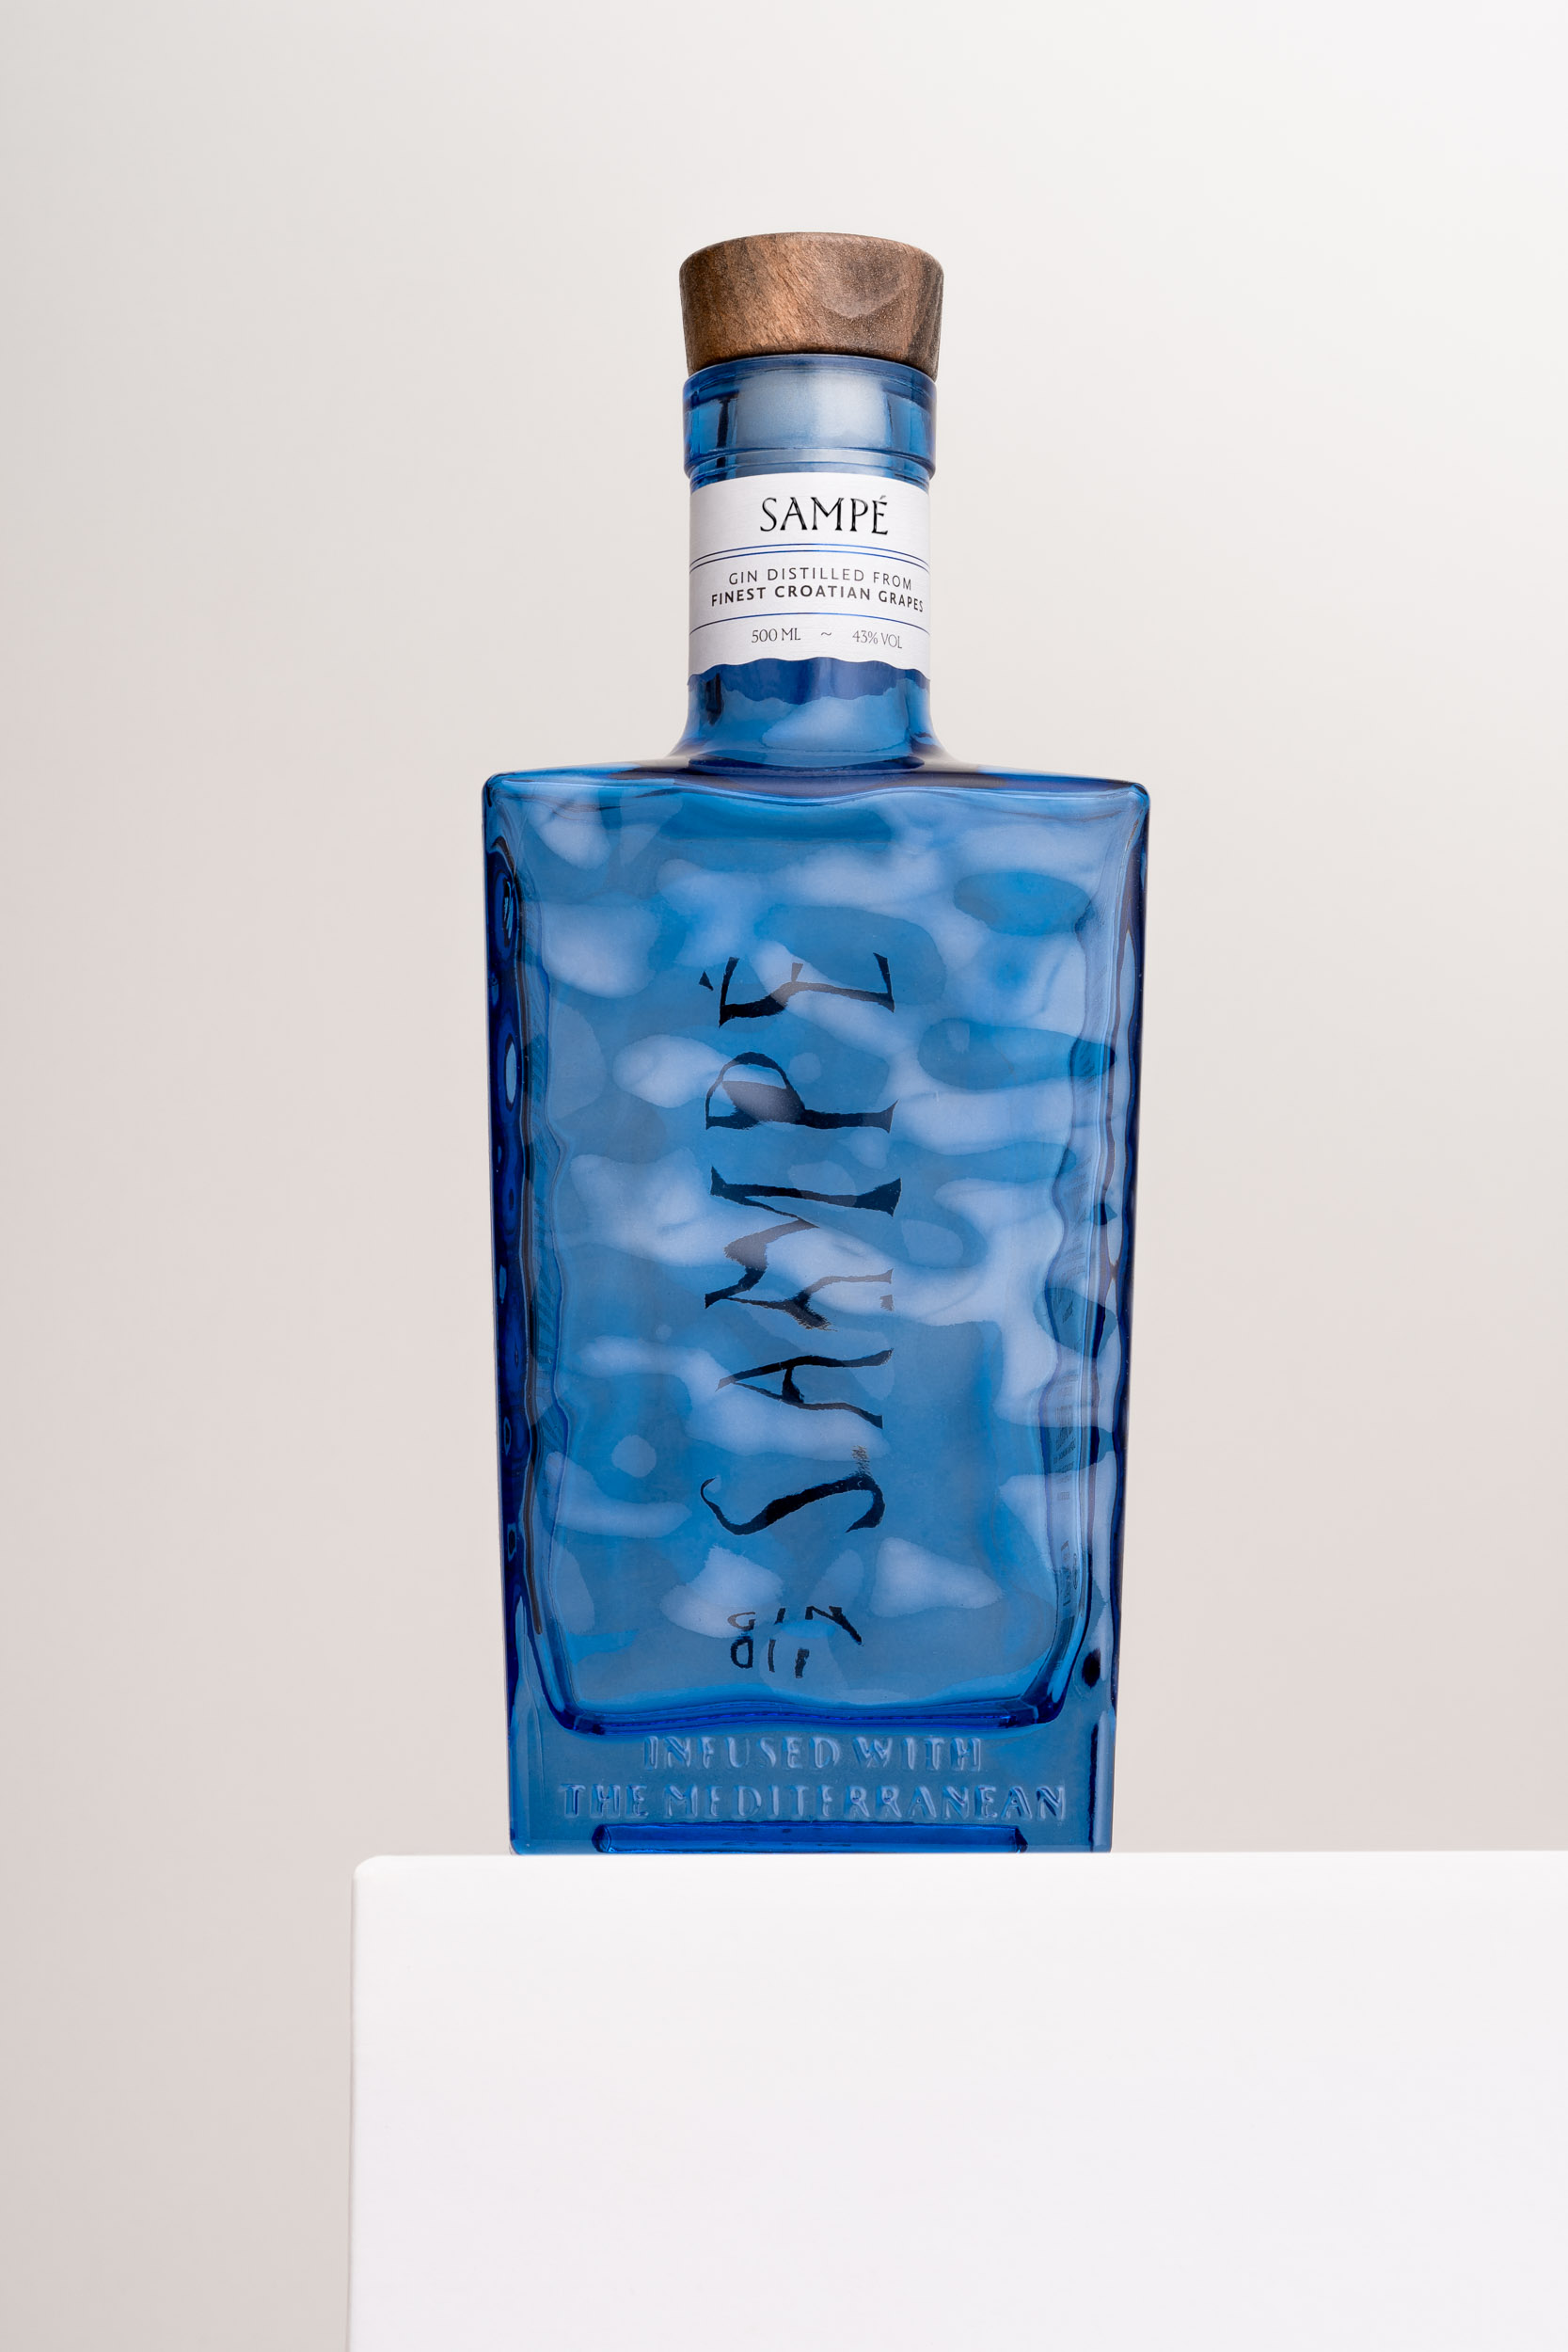 Sampé Gin – Infused With the Mediterranean